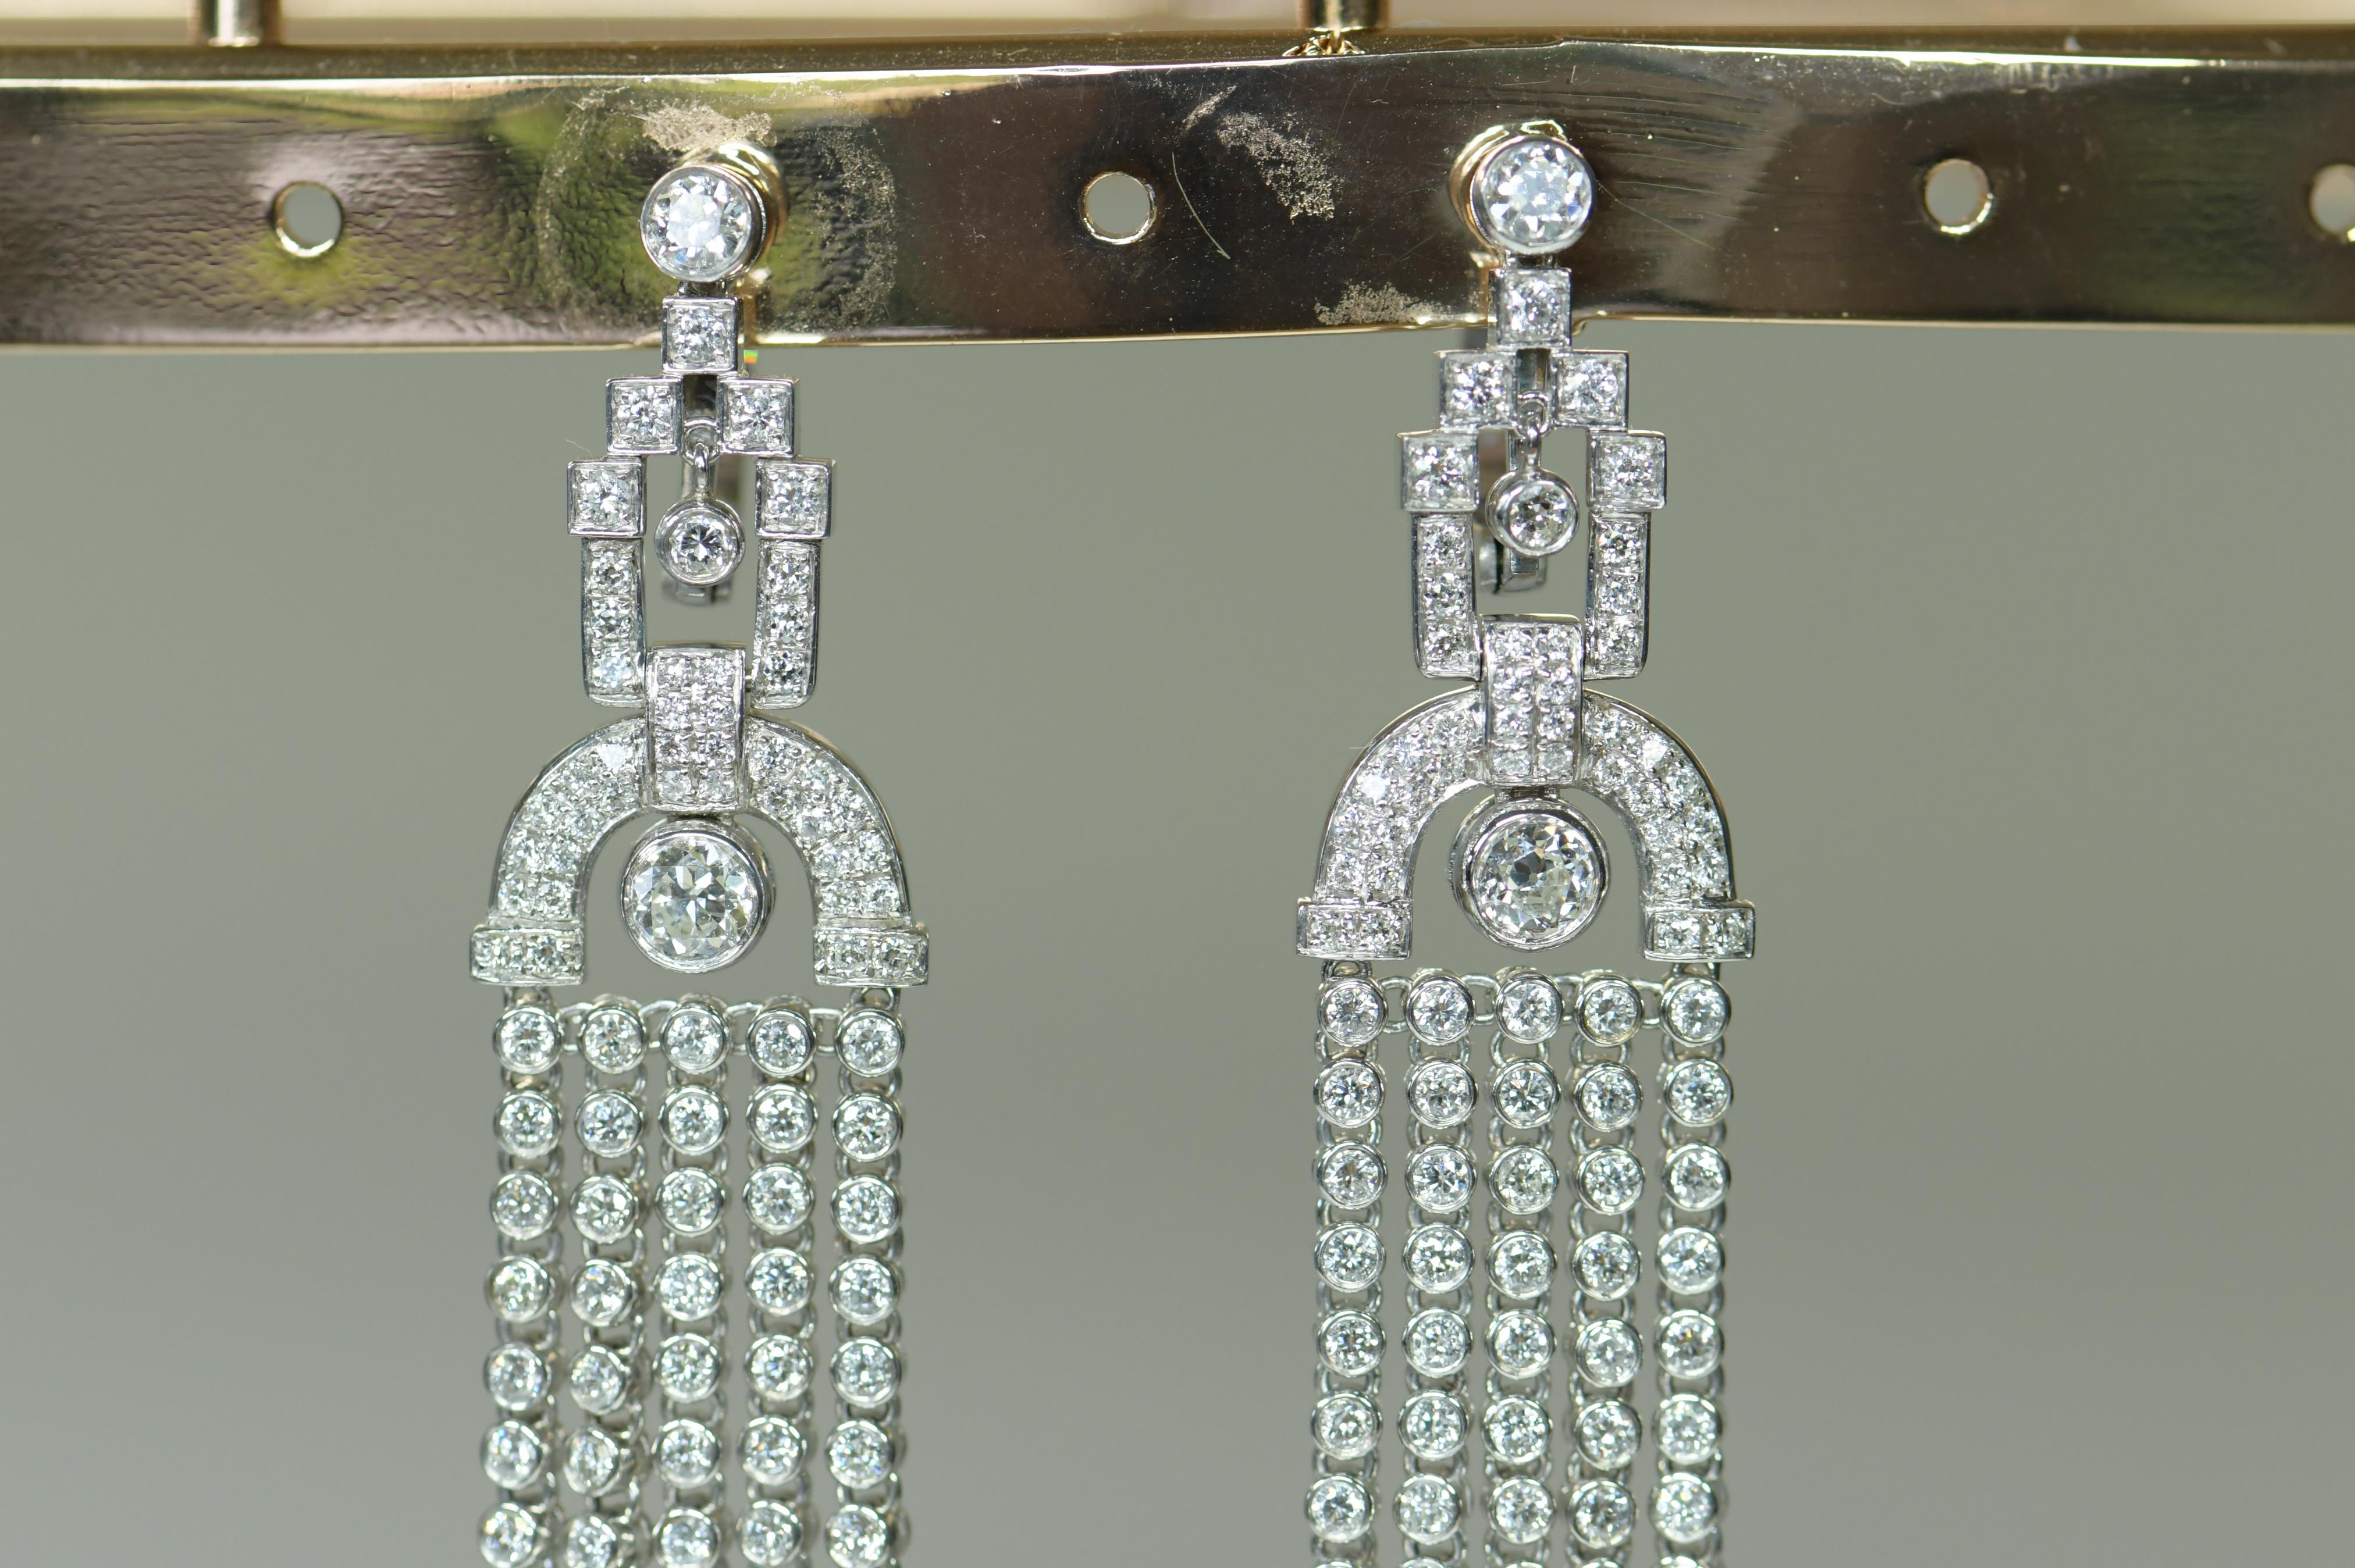 A wonderful pair of gold diamond set earrings which are amazing on the ear as they move and catch the light beautifully. 18K white gold, each formed as a tassel with five articulated drops pendant from a bulbous top and trefoil surmount, set